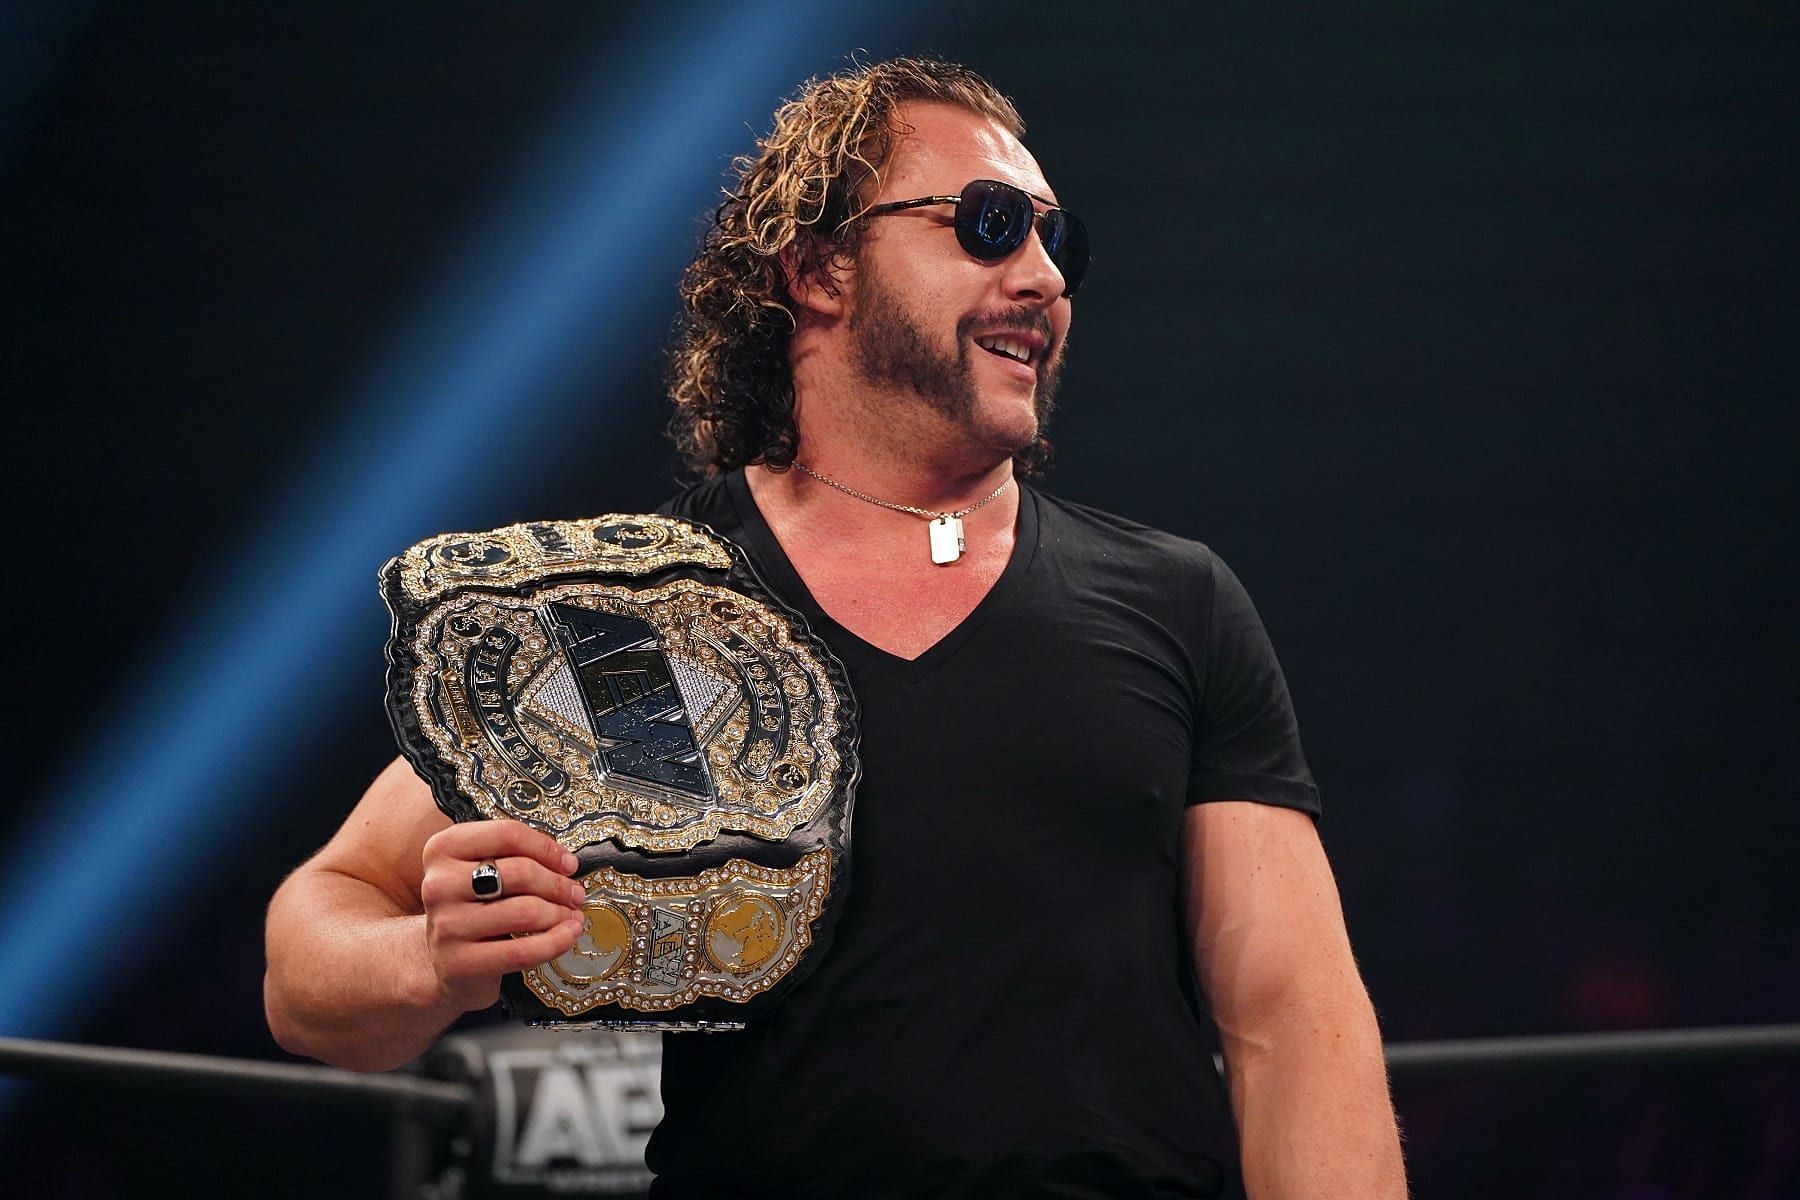 Kenny Omega is currently out of action due to injuries